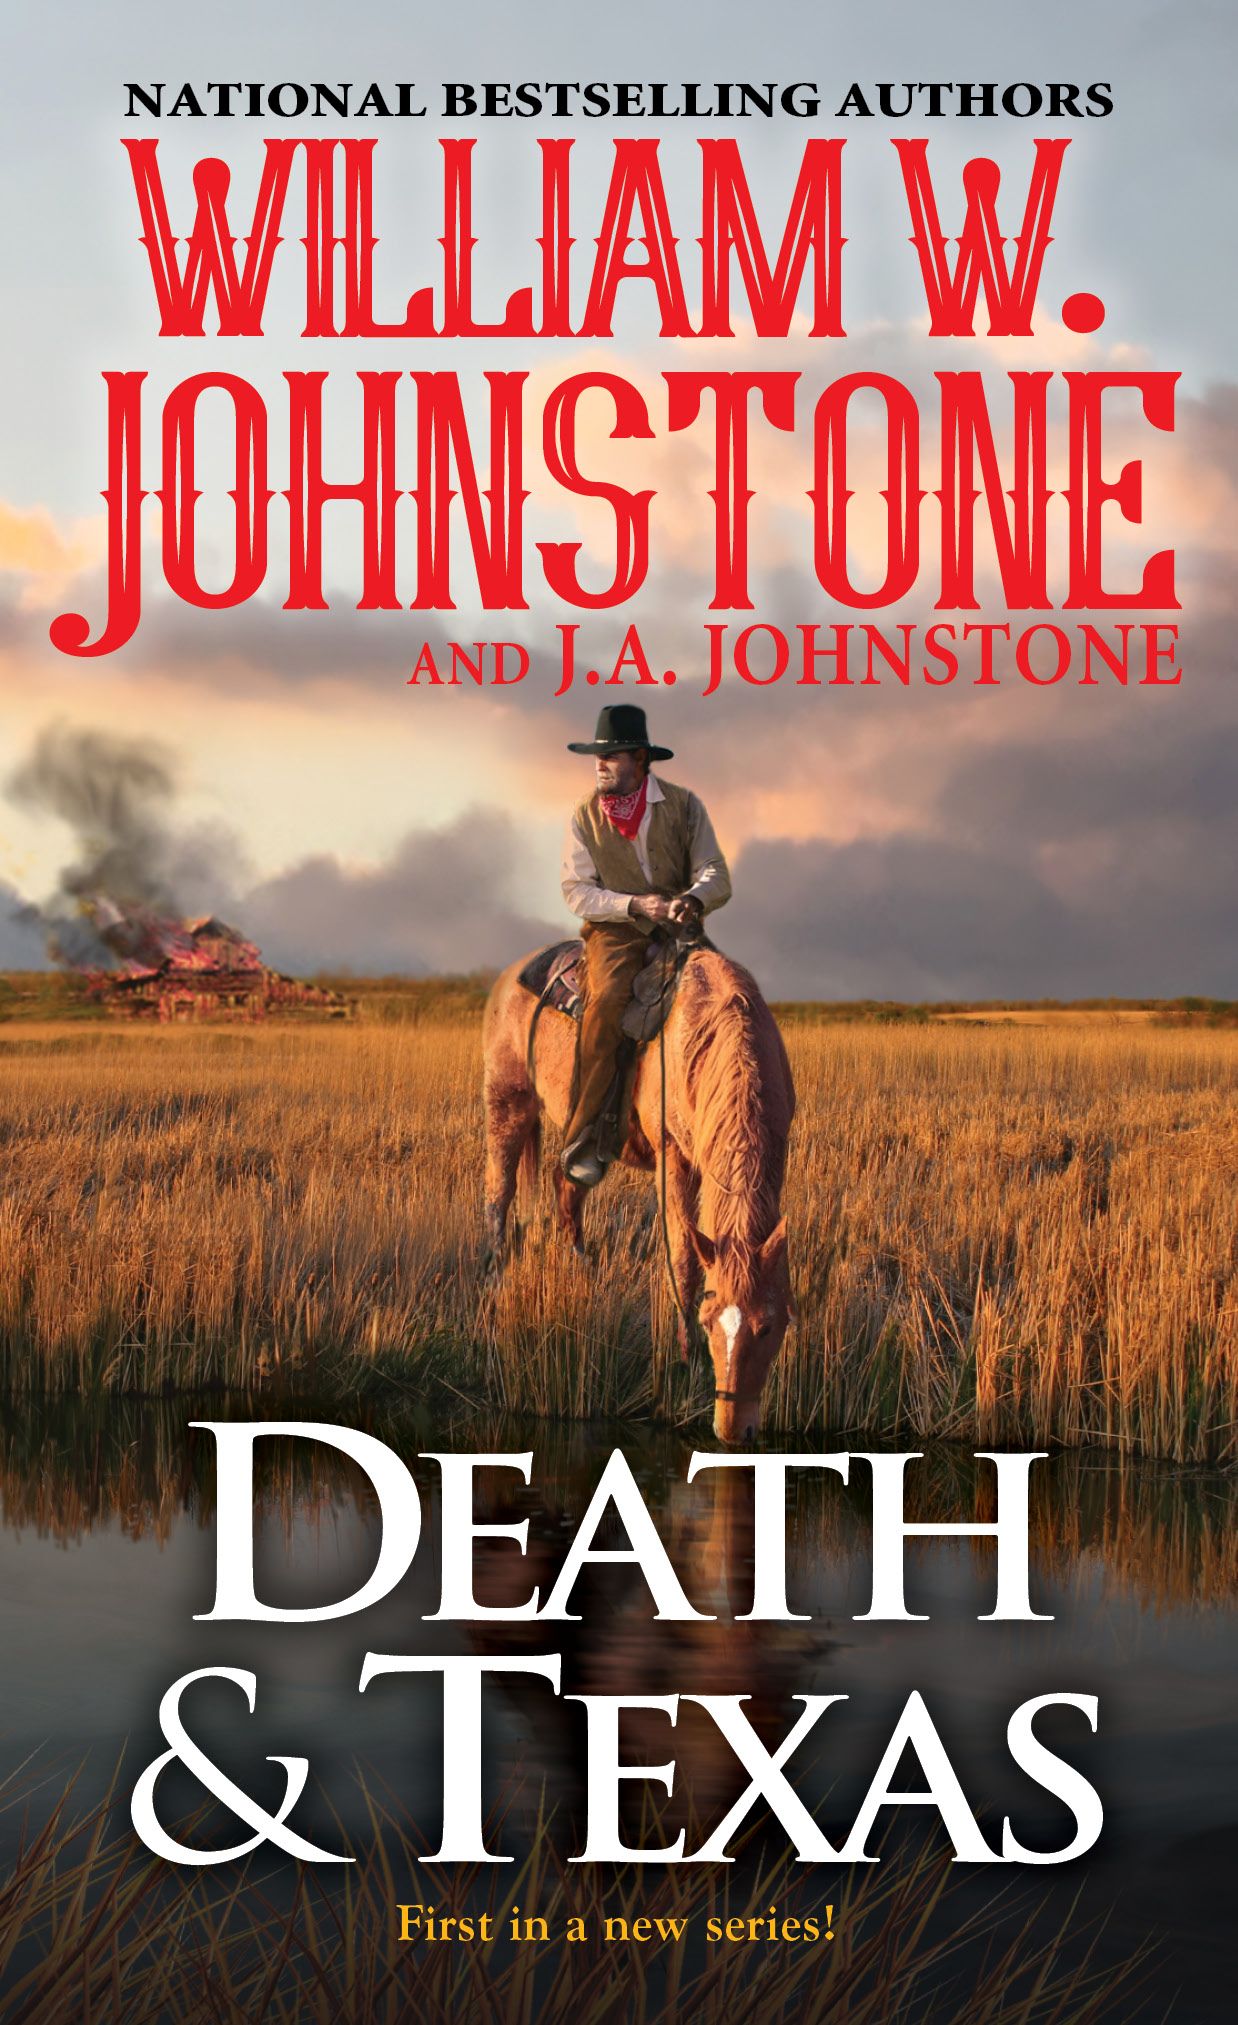 DEATH AND TEXAS by William W. Johnstone & J.A. Johnstone